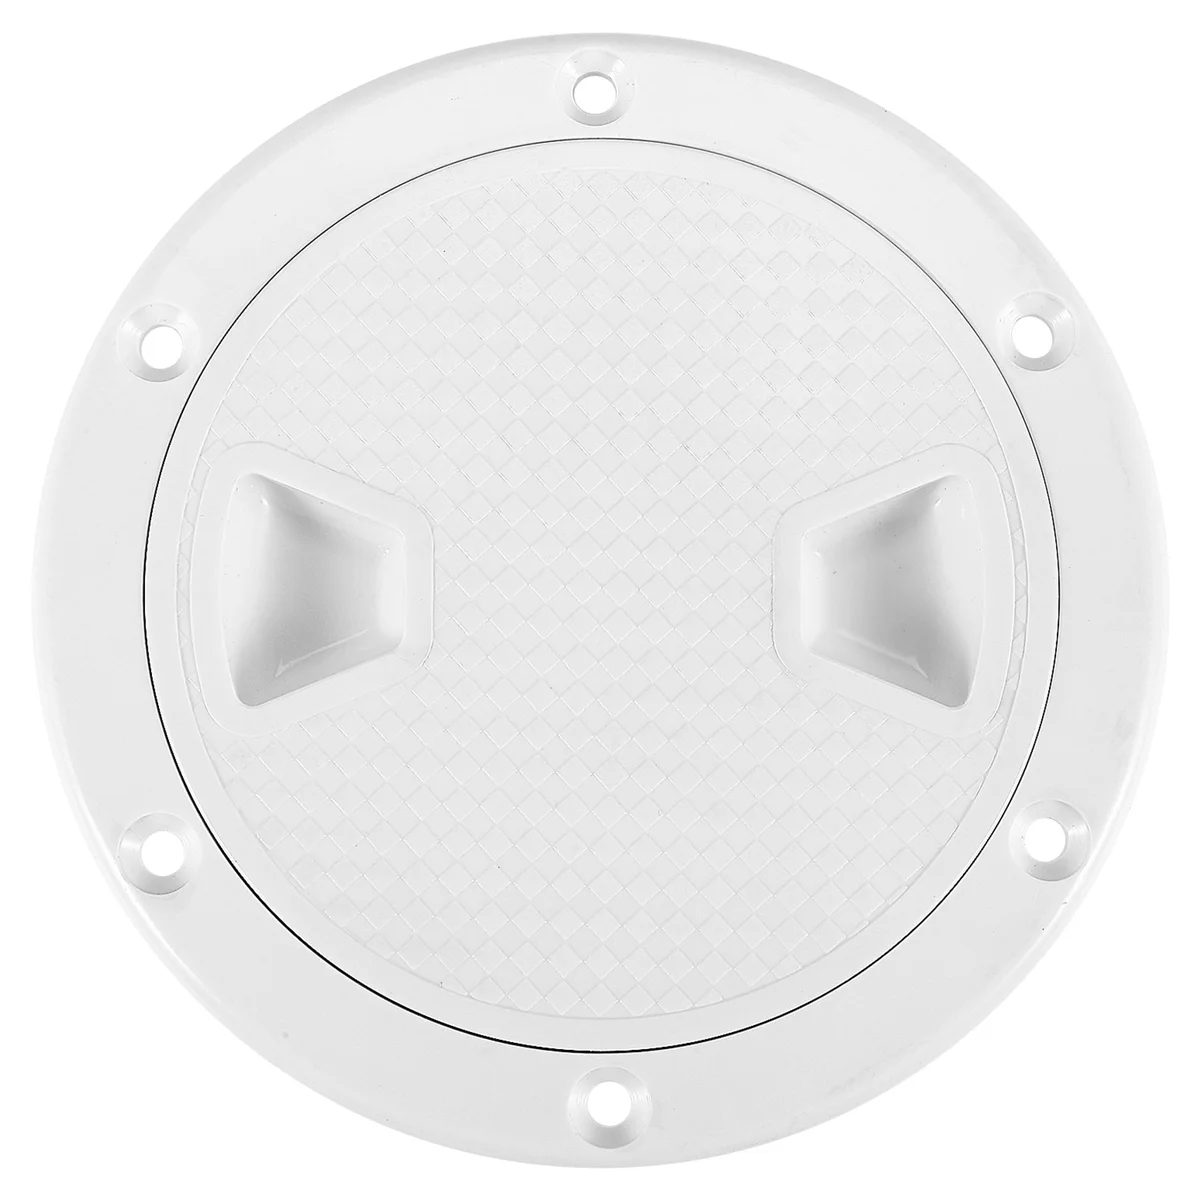 

Circular Non Slip Inspection Hatch-Boat Hatch Deck Plate with Detachable Cover for RV Marine Boat Kayaks-4Inch